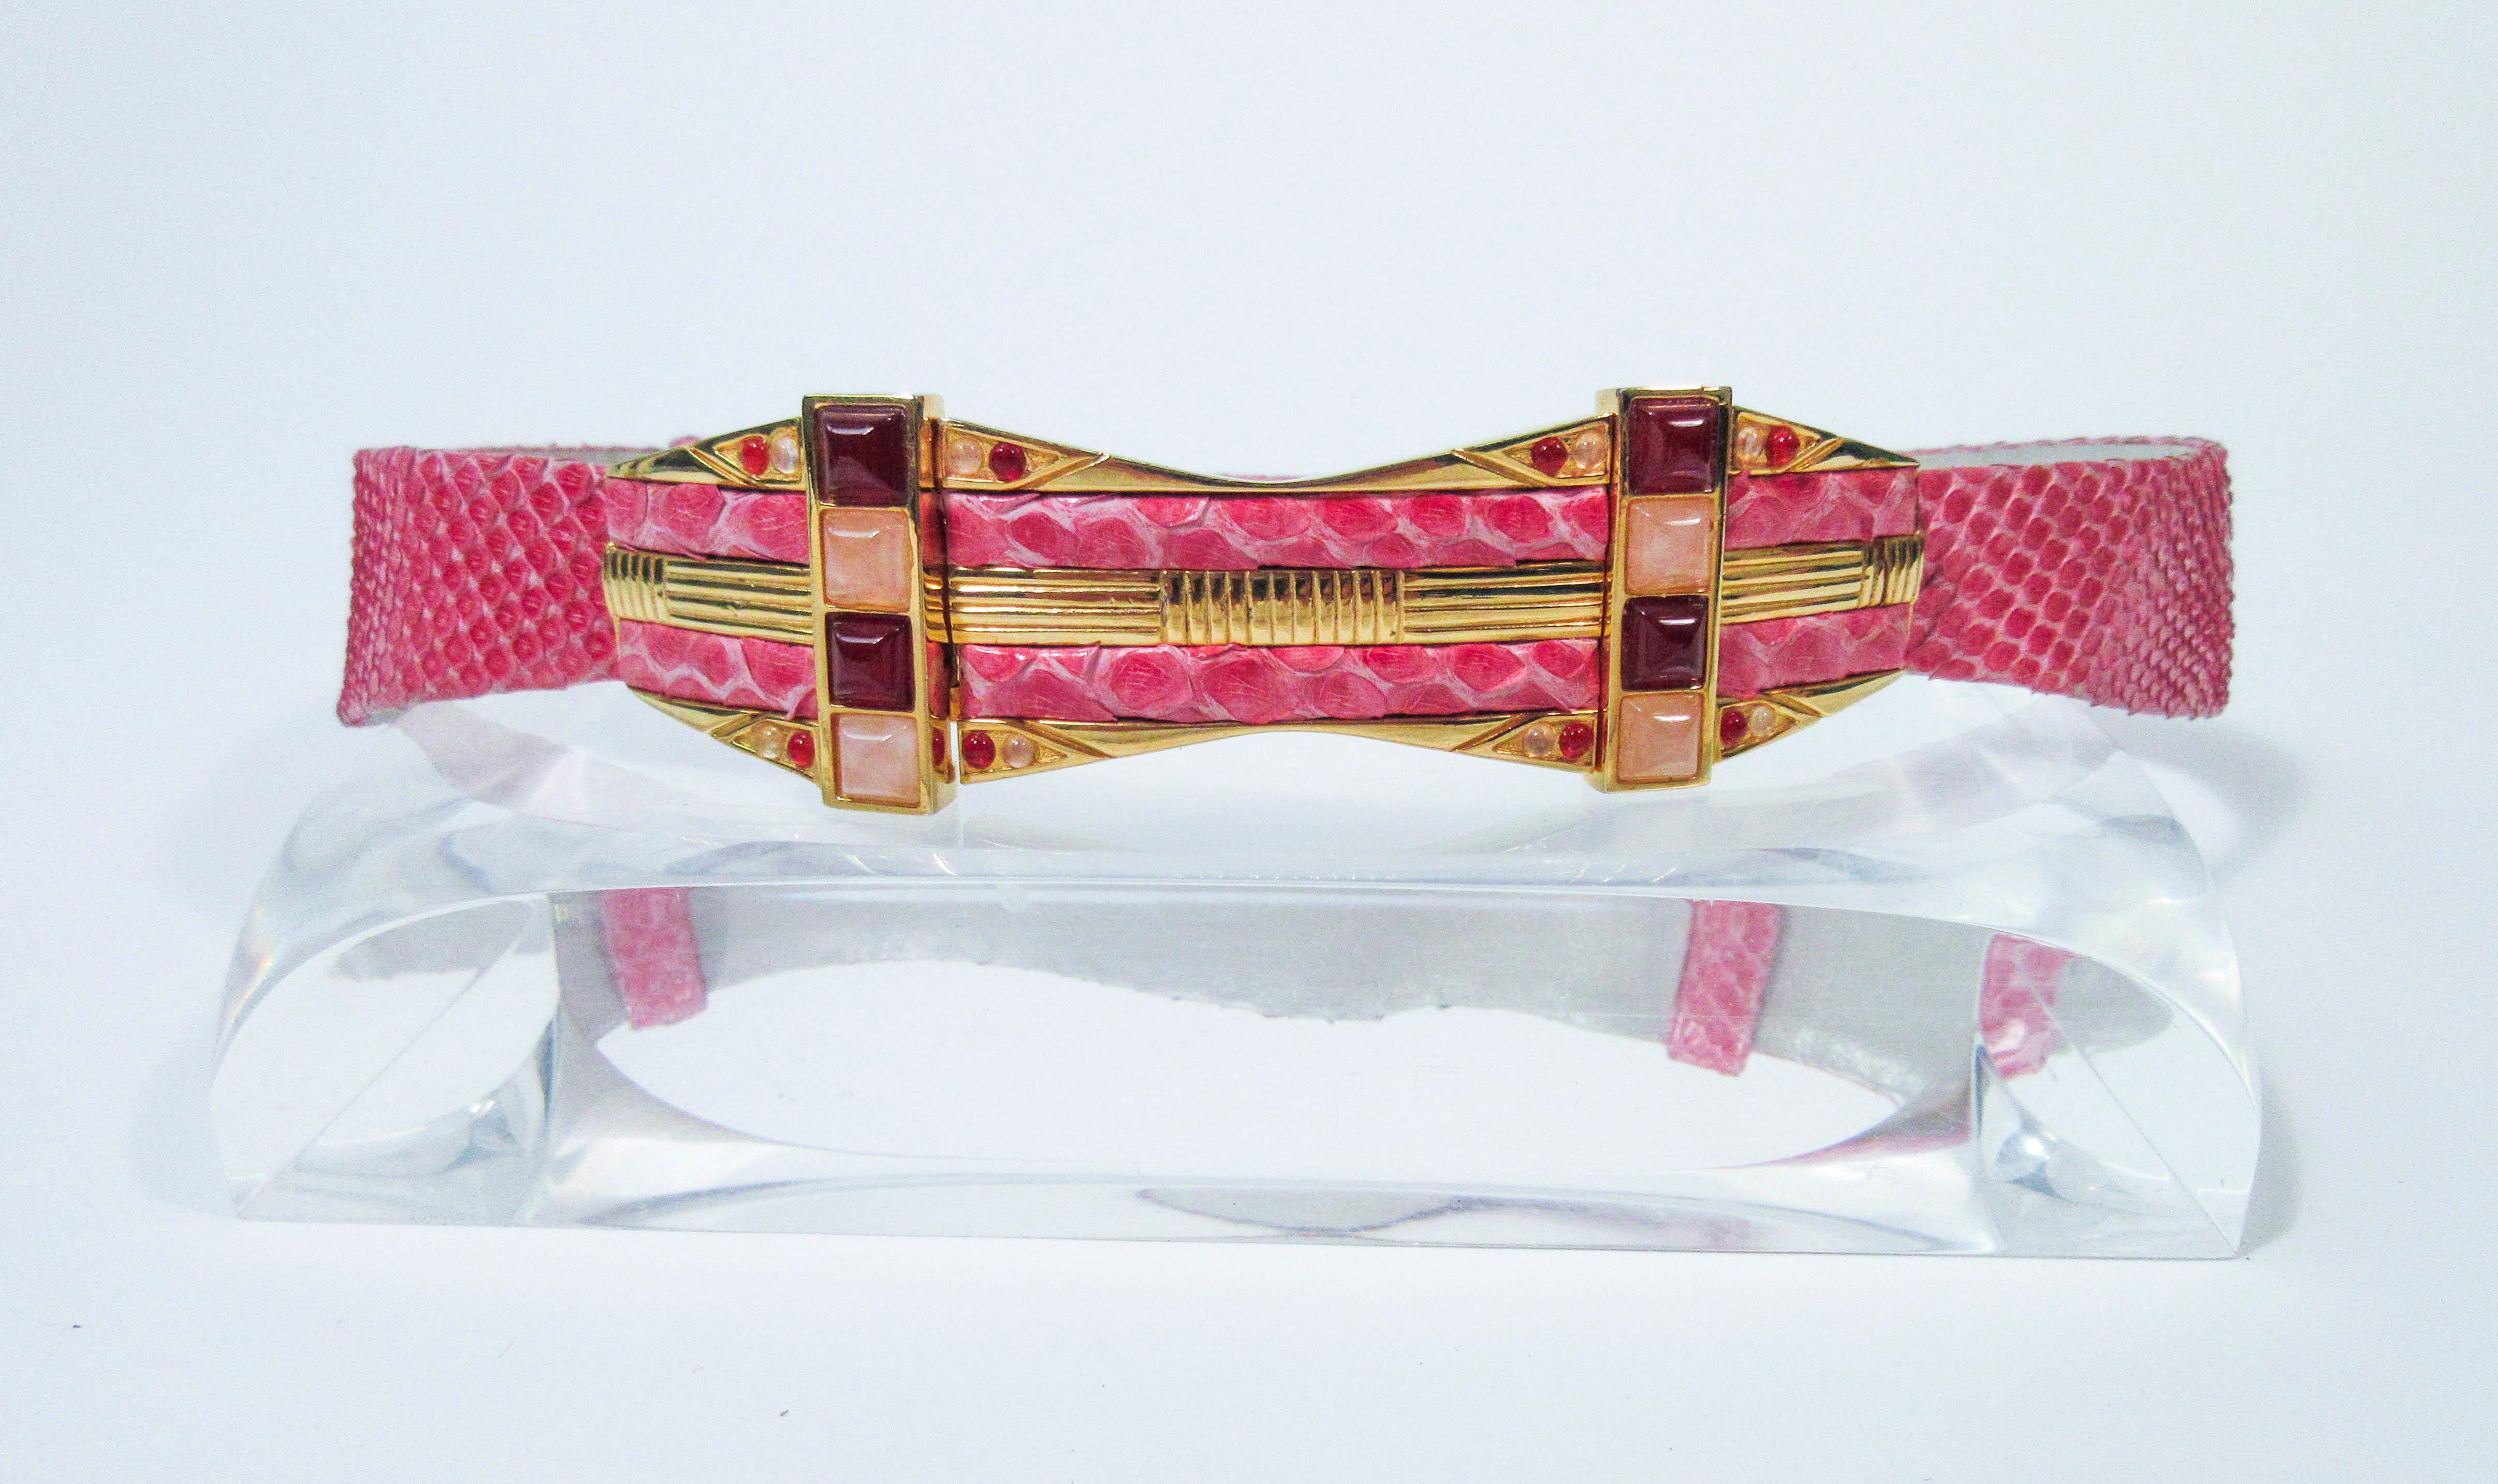 This Judith Leiber belt is composed of a pink snakeskin. Features an adjustable design with cabochon set stones. In excellent 'like new' pre-owned condition (some signs of wear due to age, see photos). Sold 